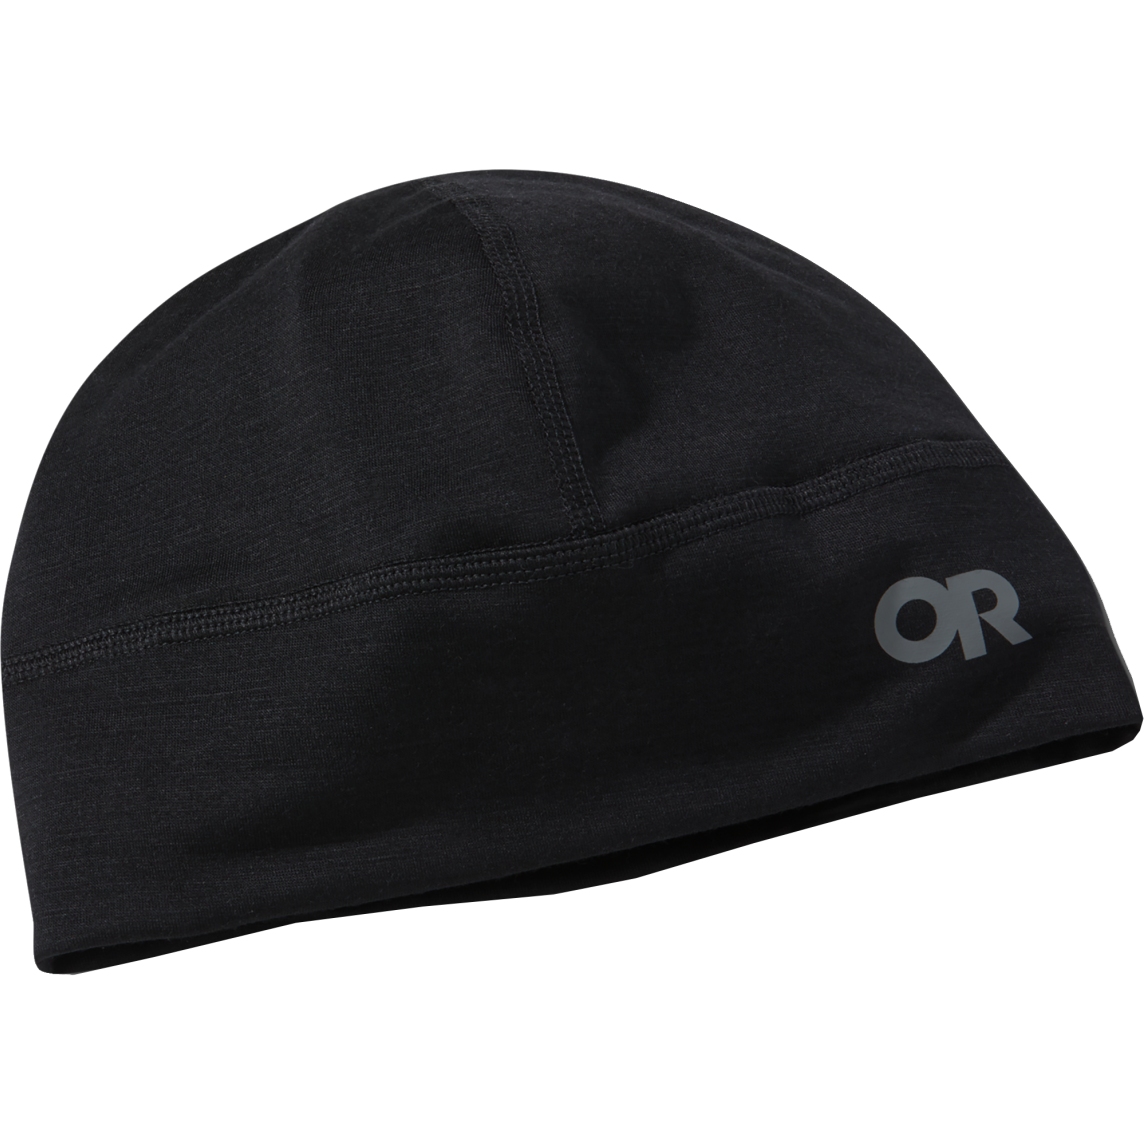 Picture of Outdoor Research Alpine Onset Merino 150 Beanie - black